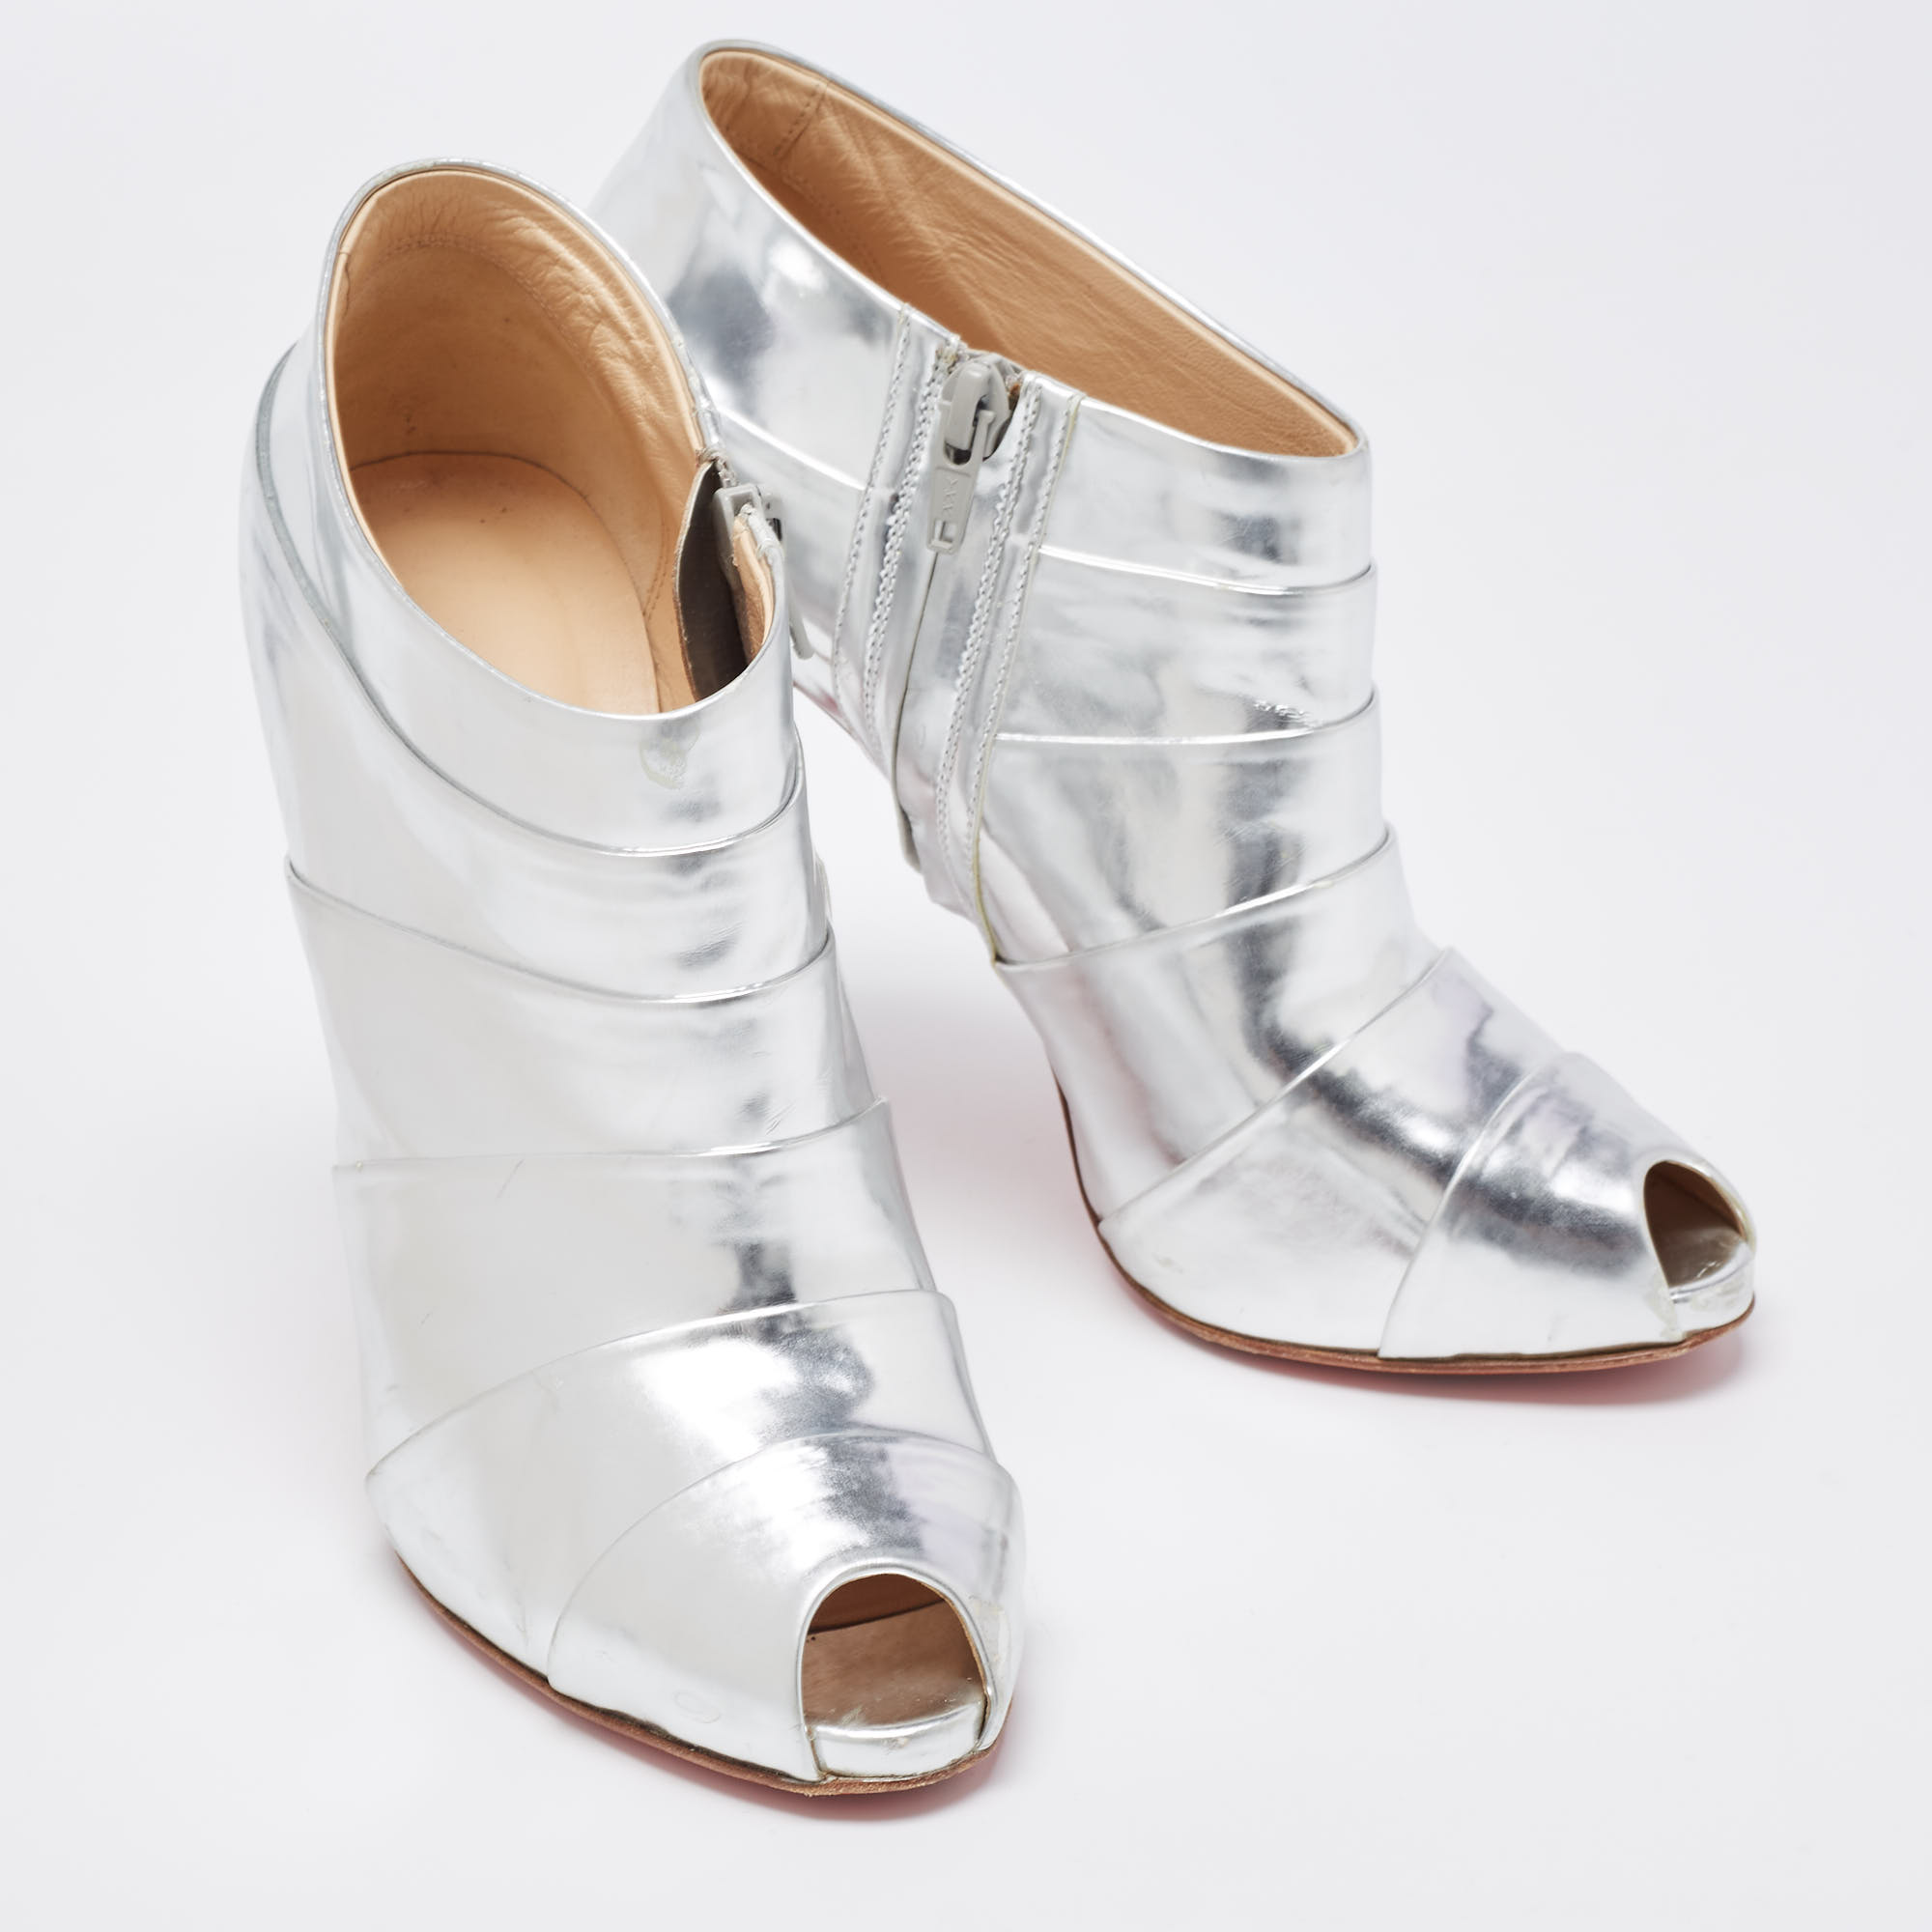 Christian Louboutin Silver Leather Booties Size 39